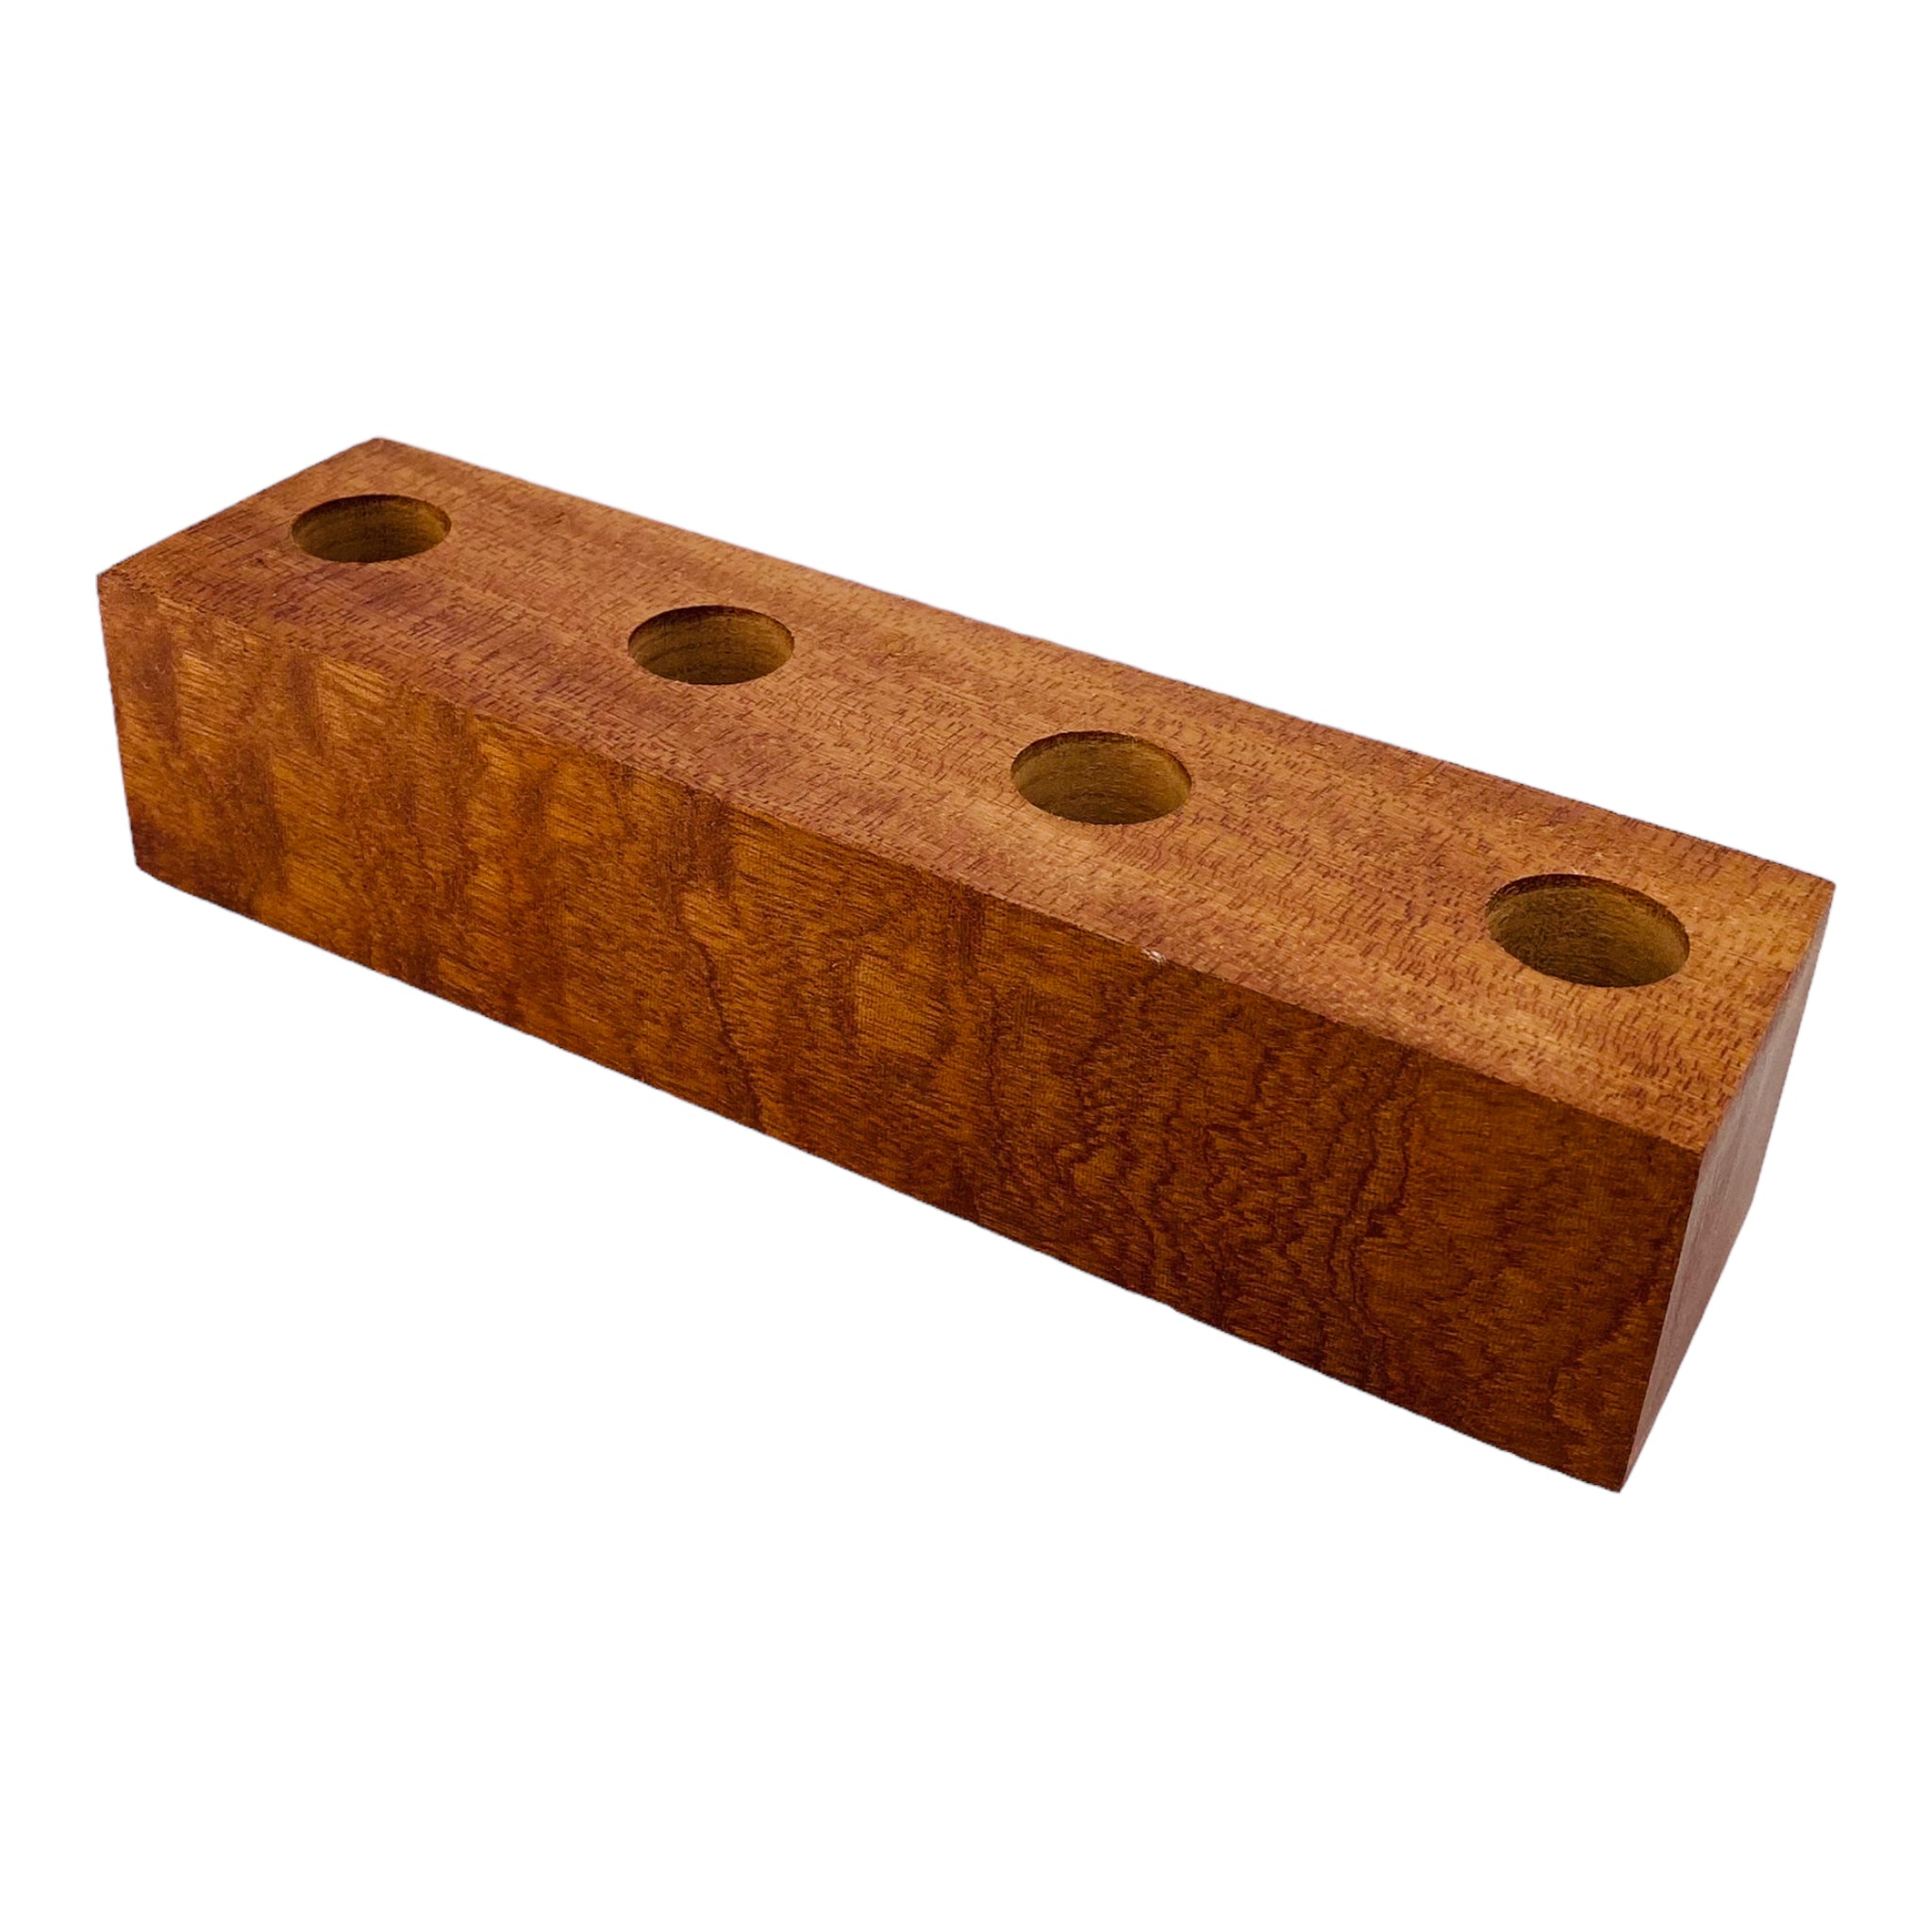 4 Hole Wood Display Stand Holder For 18mm Bong Bowl Pieces Or Quartz Bangers - Mahogany